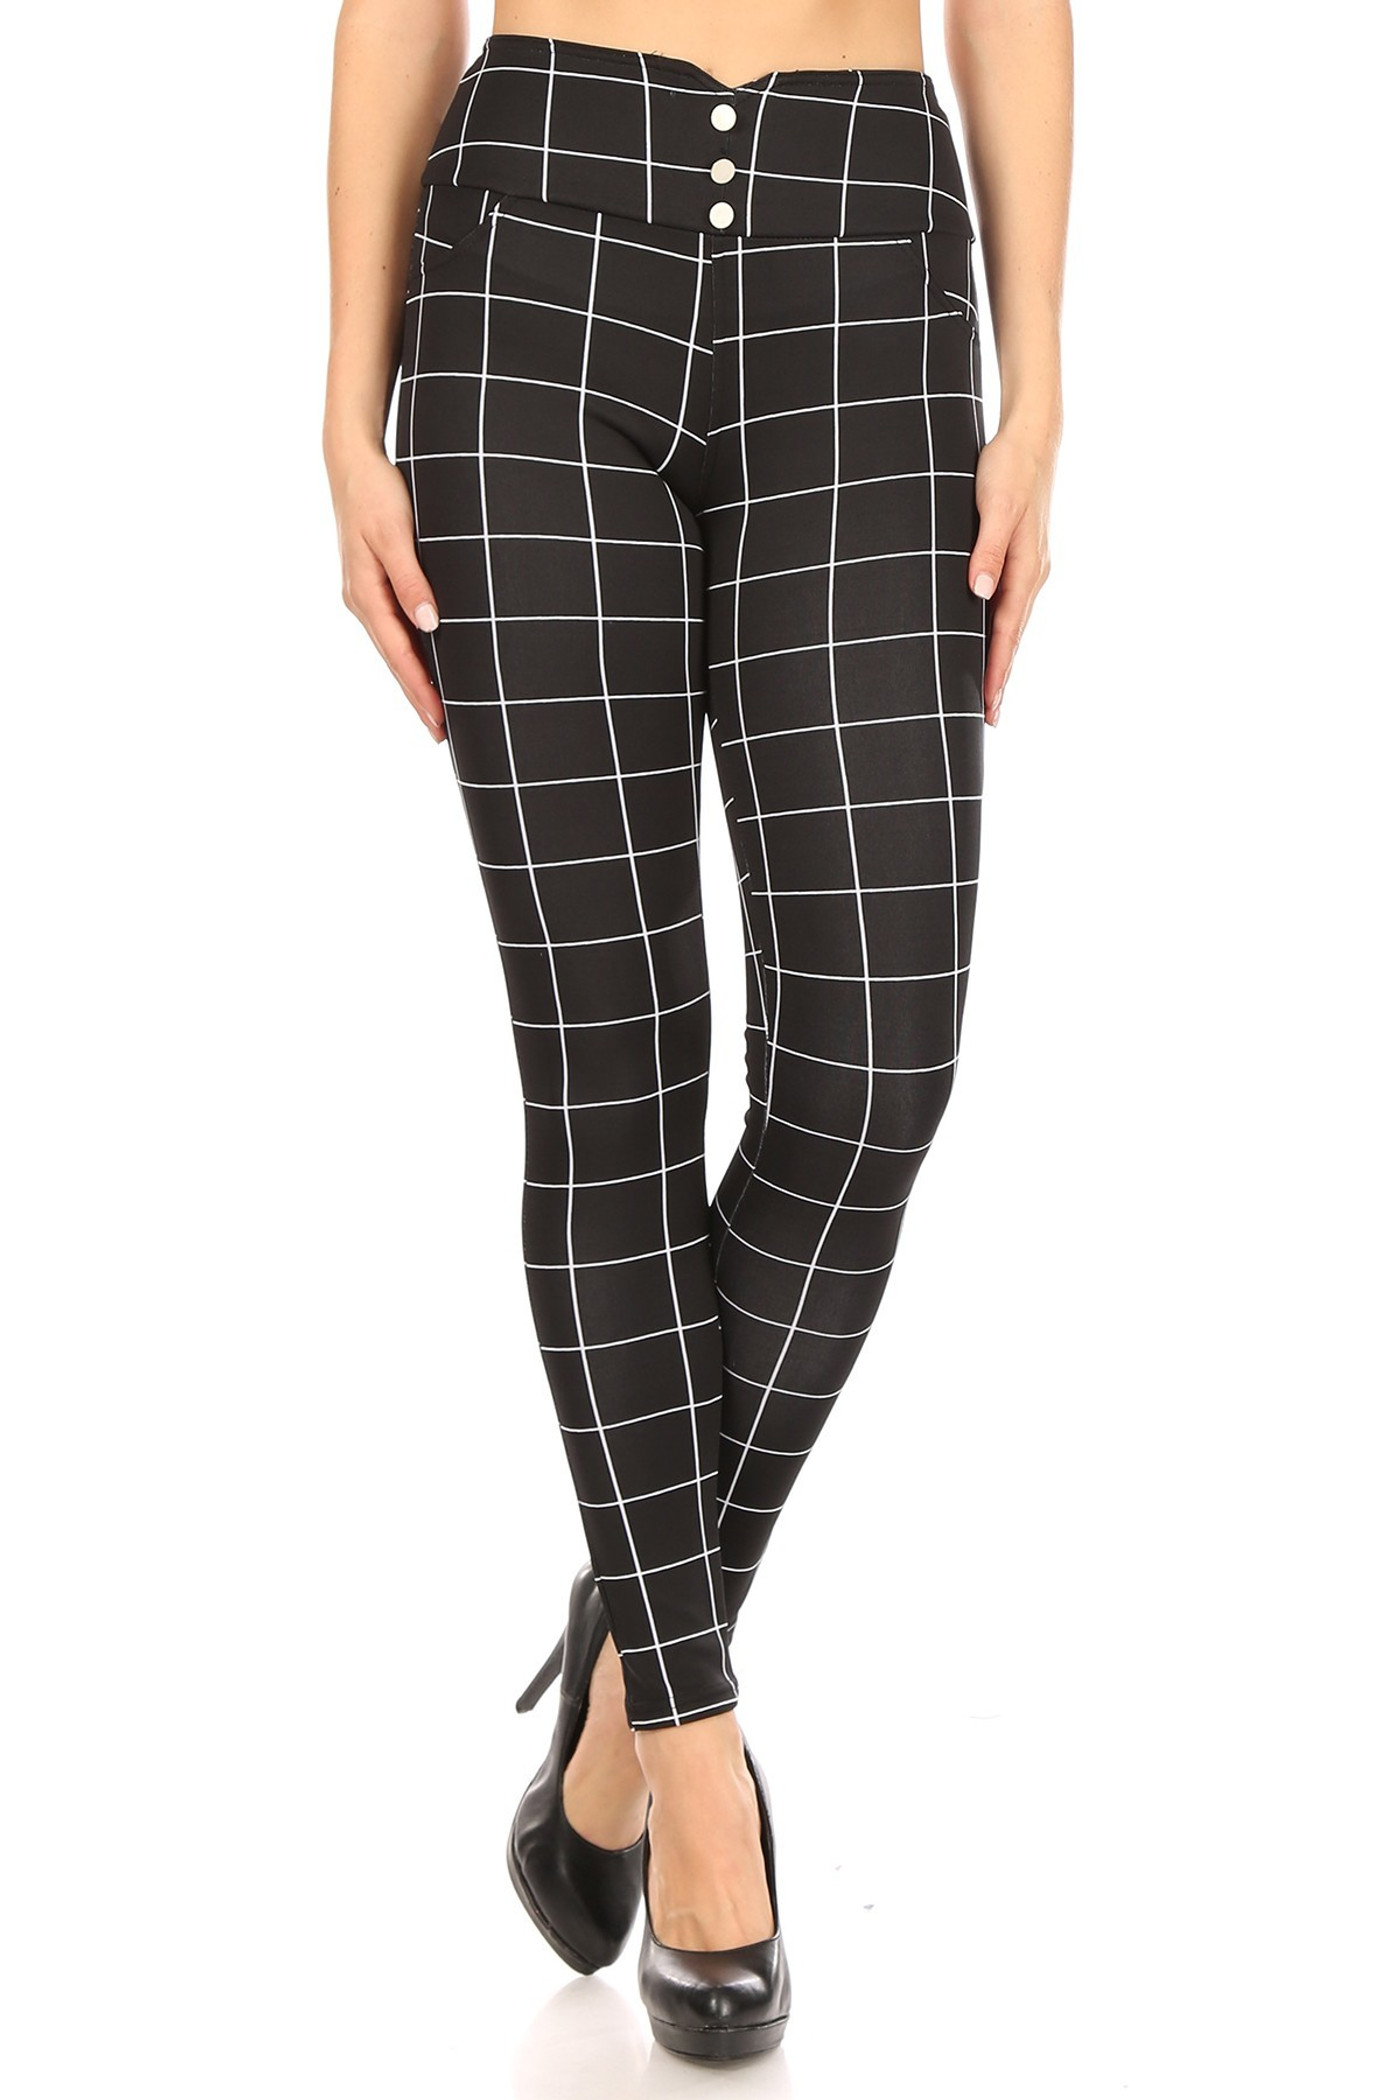 Black and White Grid Print High Waisted Treggings with Button Front